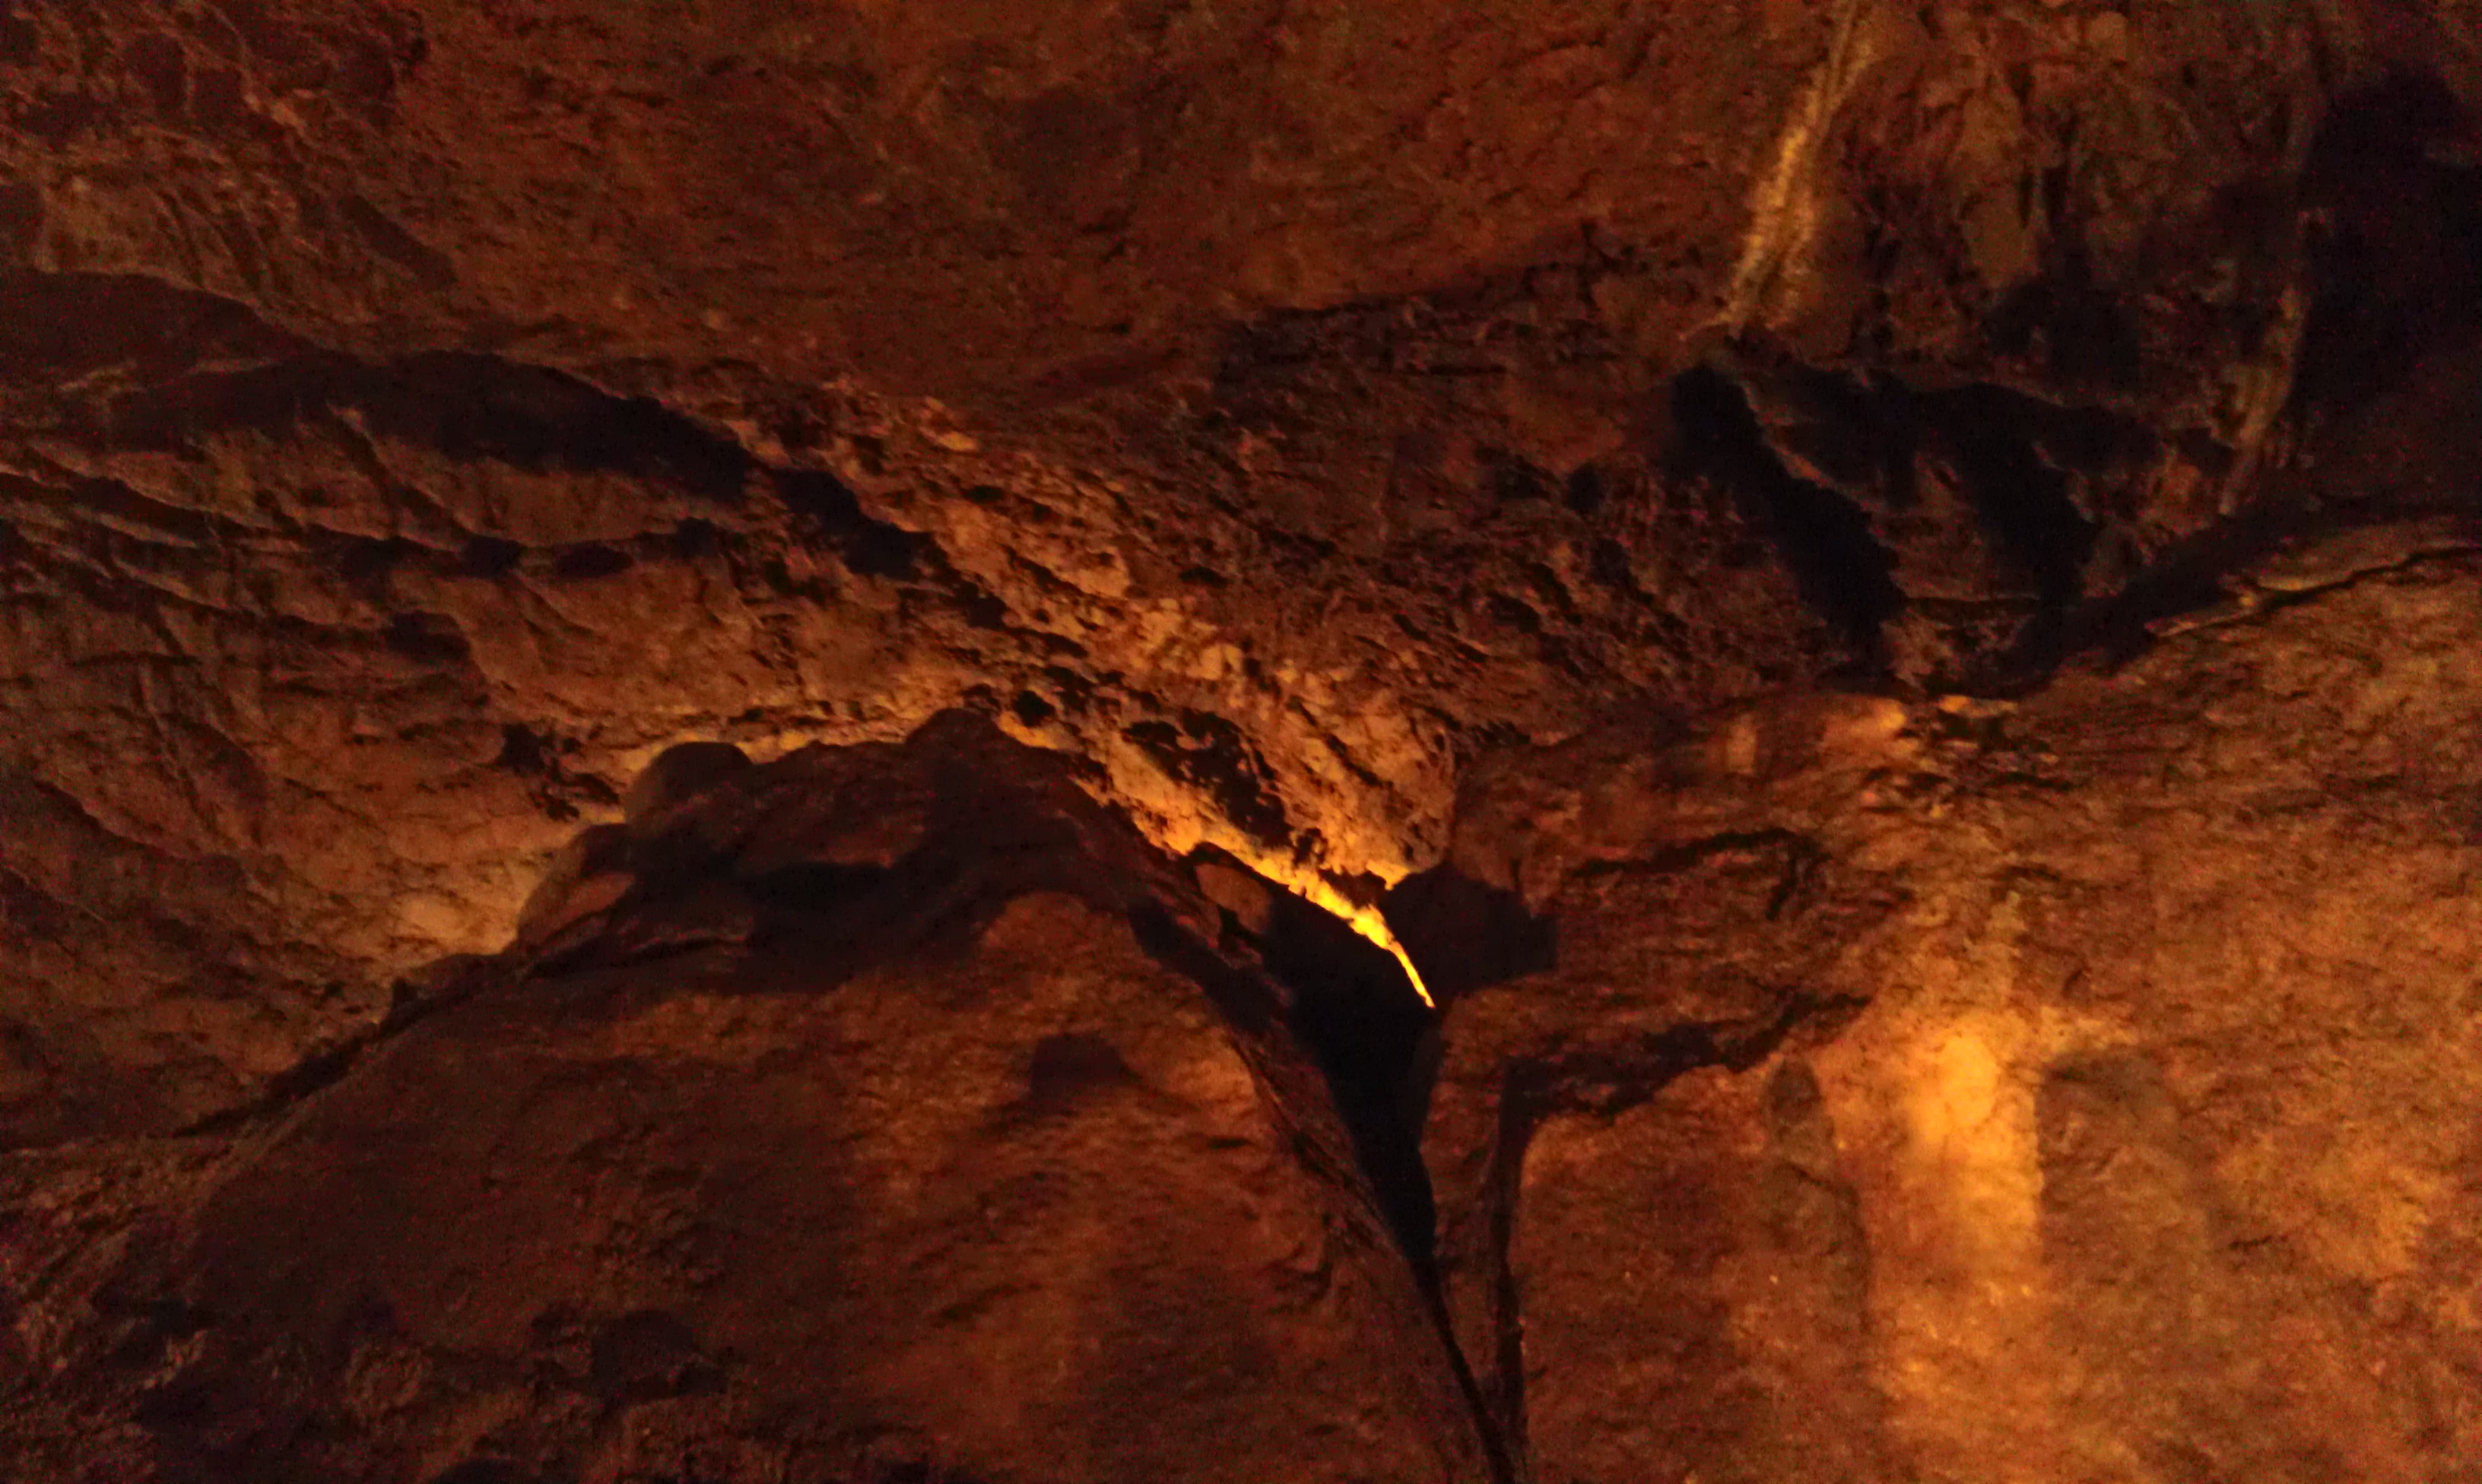 Photo 4 from Crystal-cave